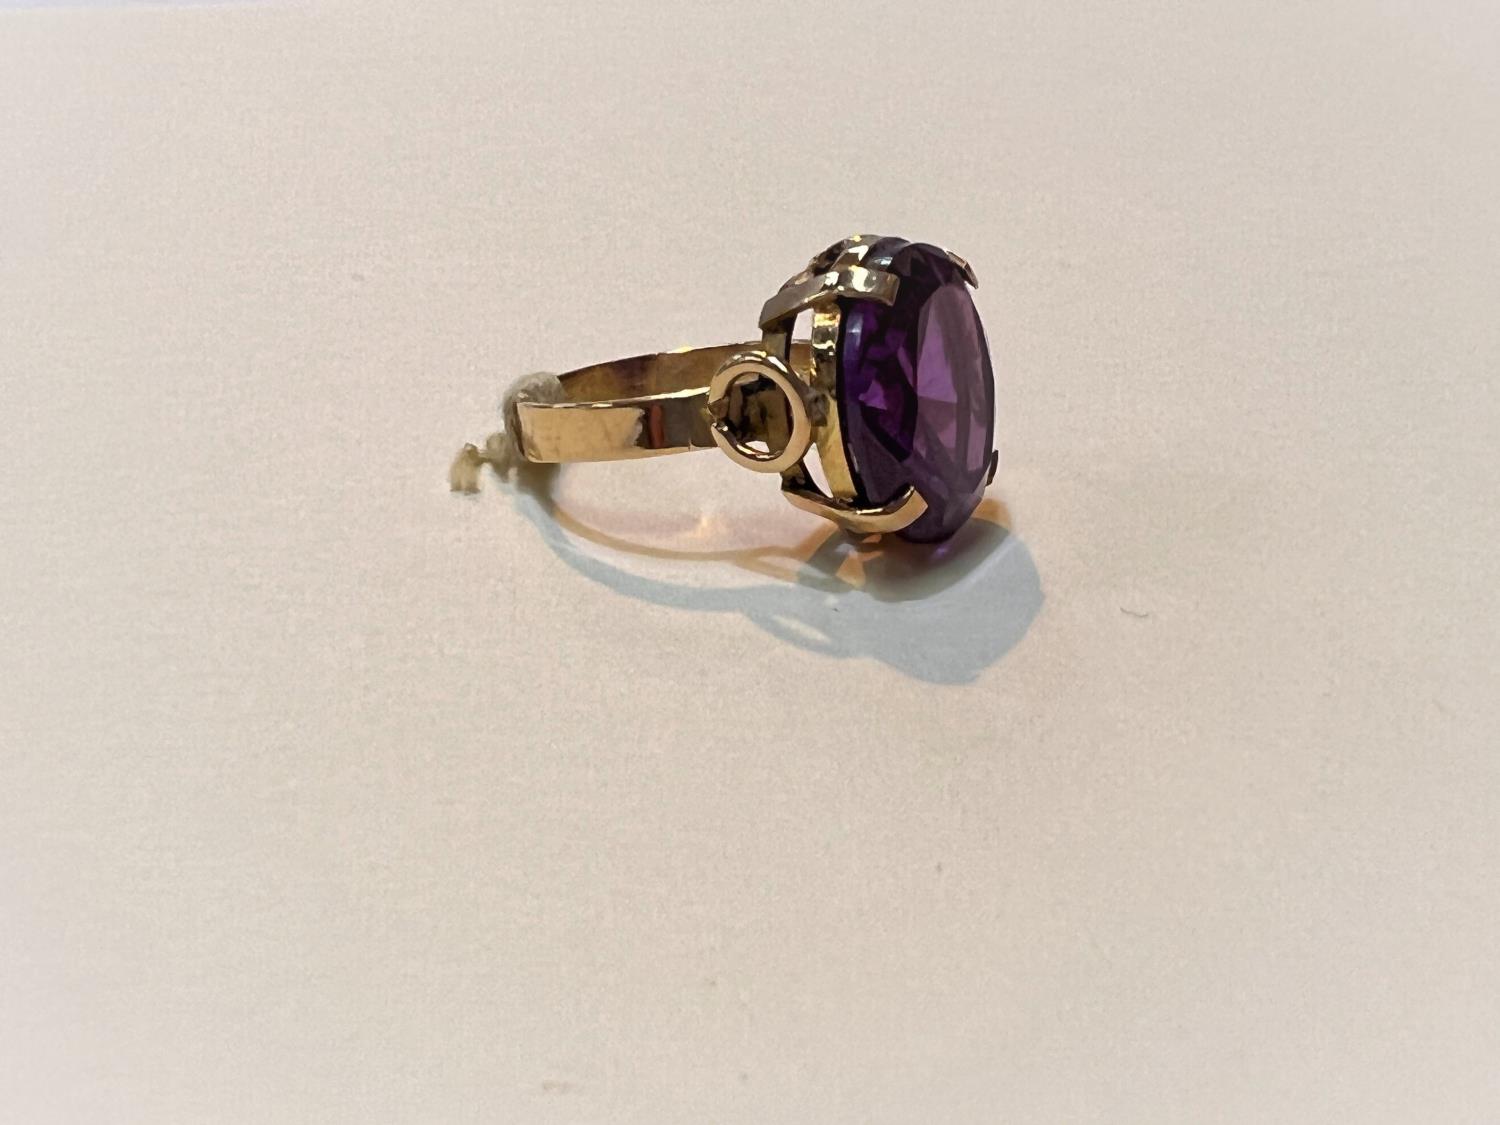 A yellow metal ring with large amethyst stone, Egyptian marked, weight 5.9gms, size M. - Image 2 of 3